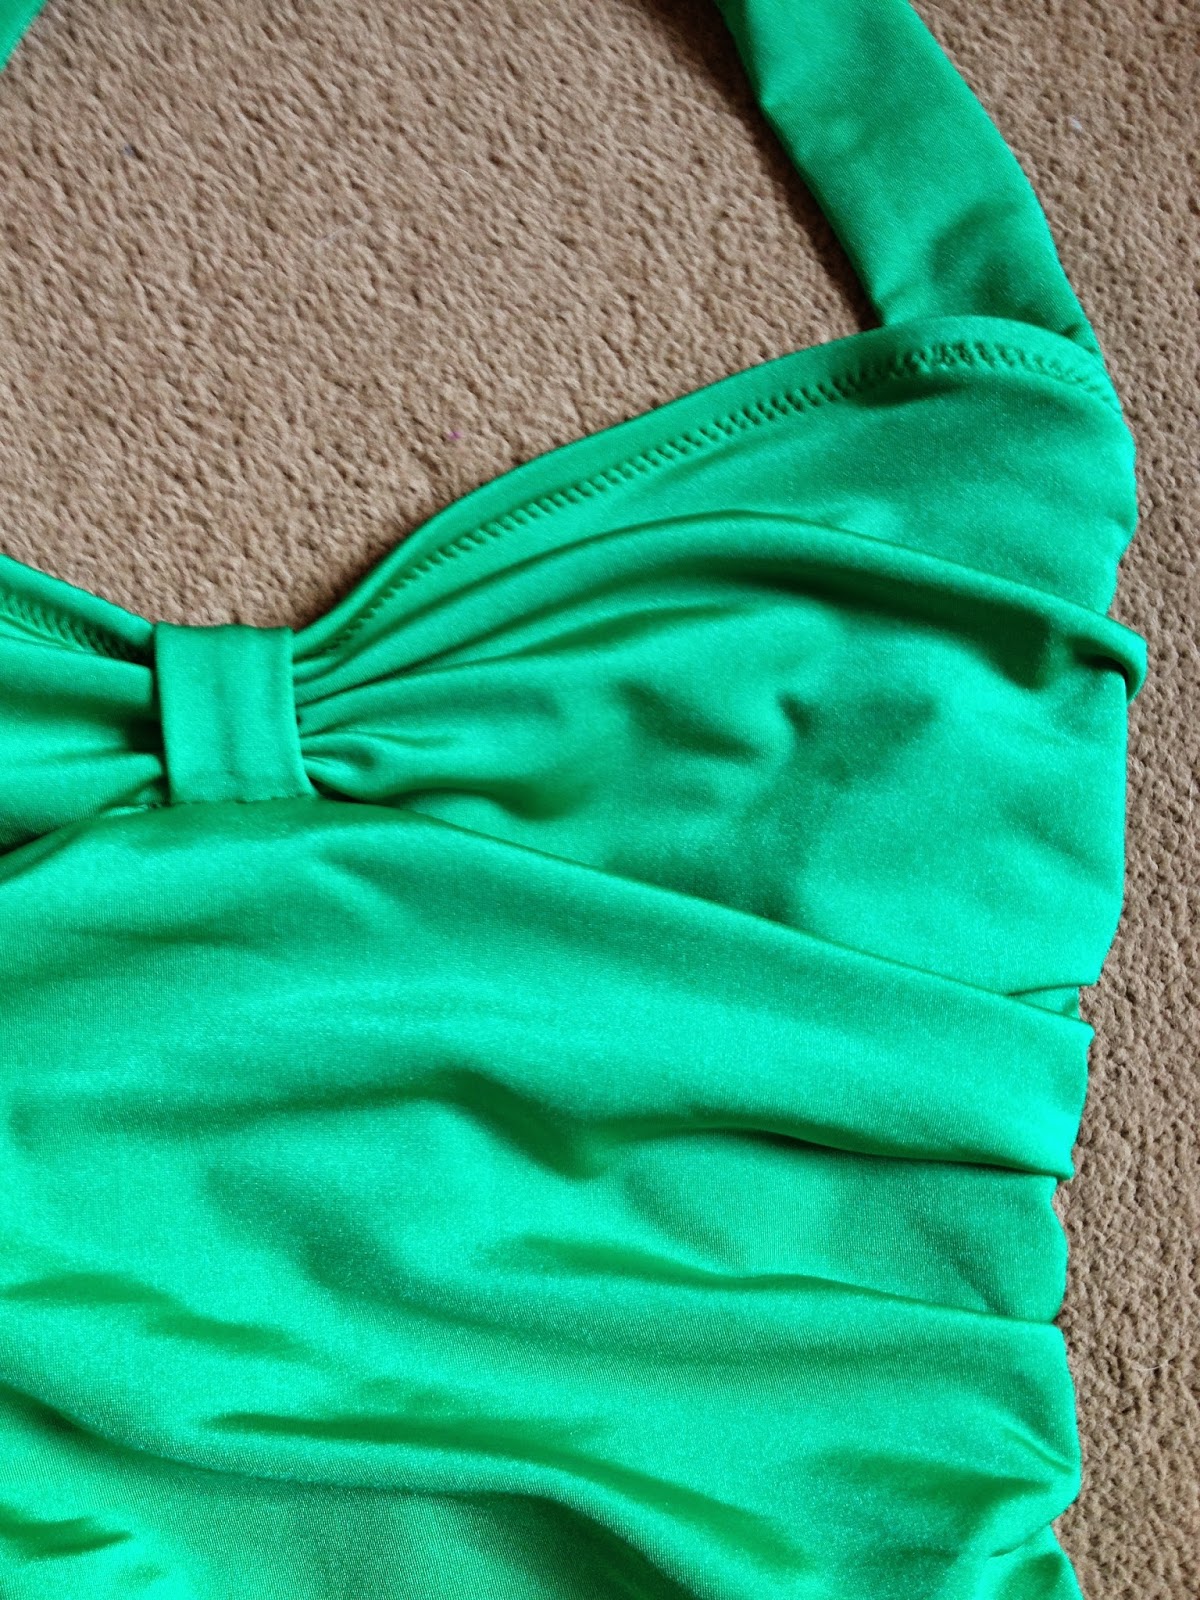 Diary of a Chainstitcher: Emerald Green Bombshell Swimsuit 